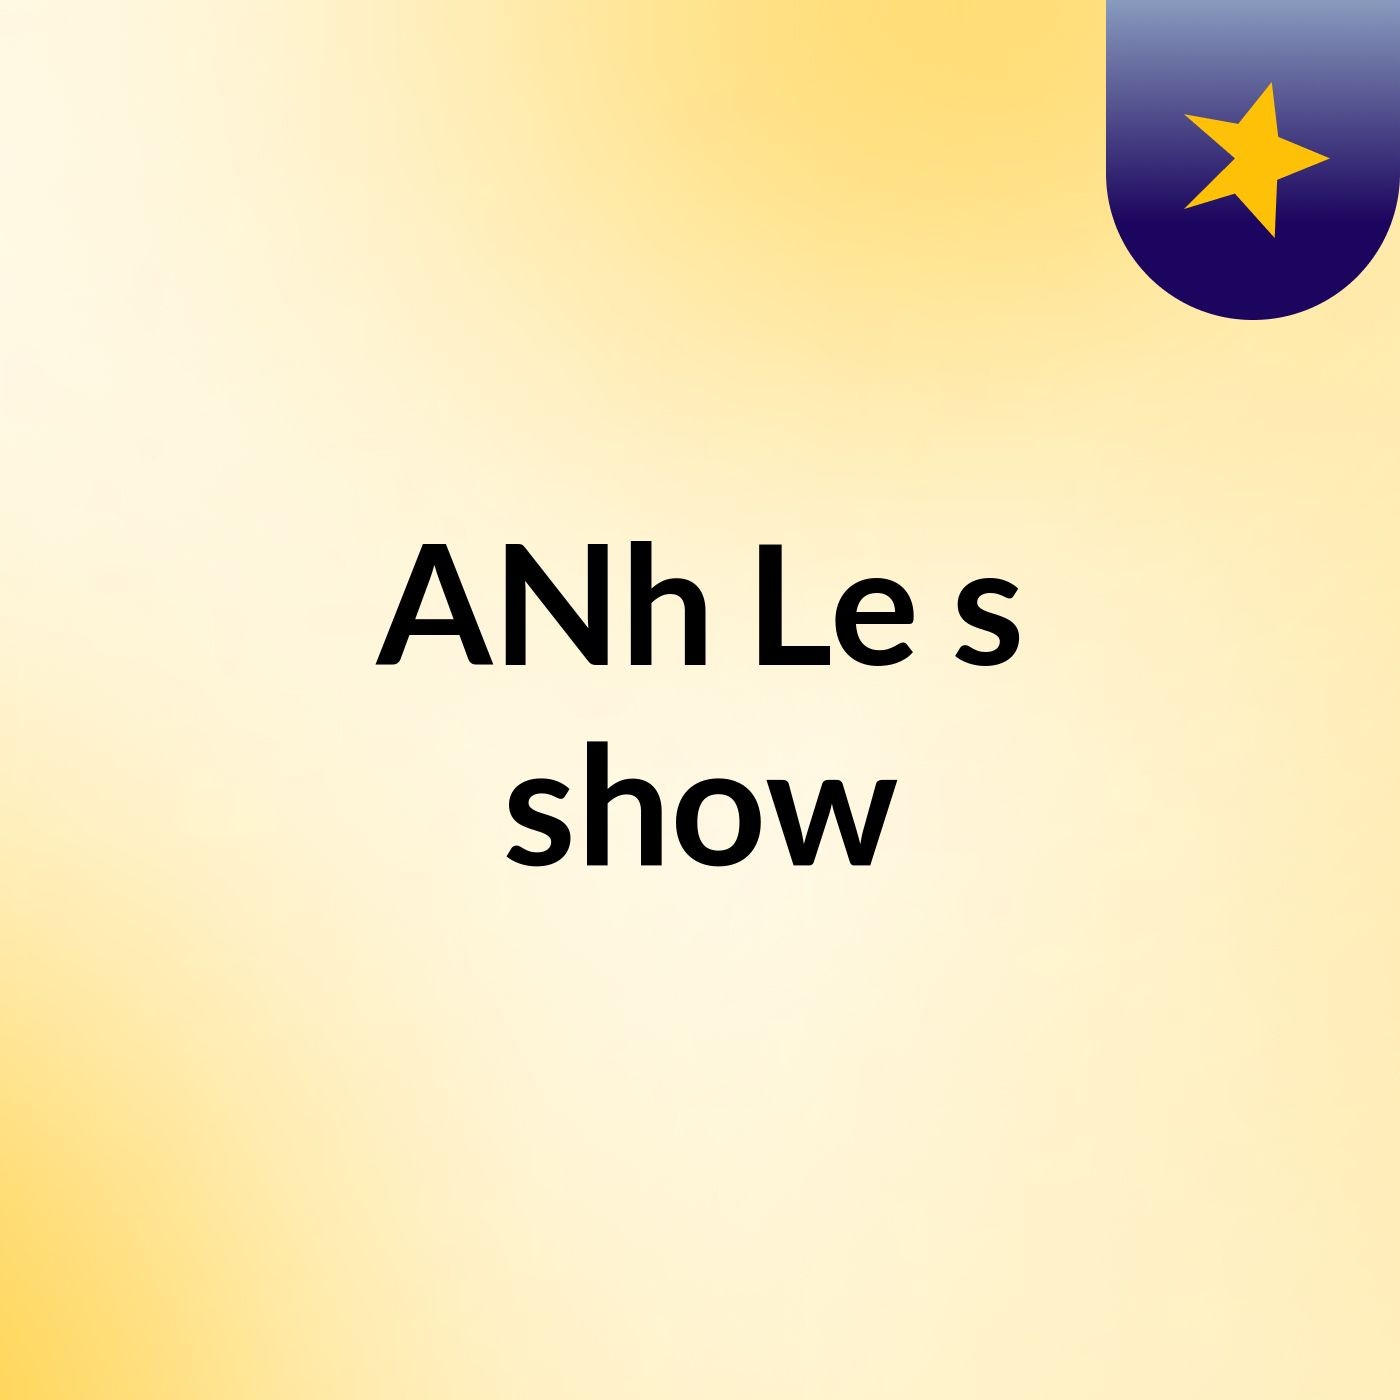 ANh Le's show